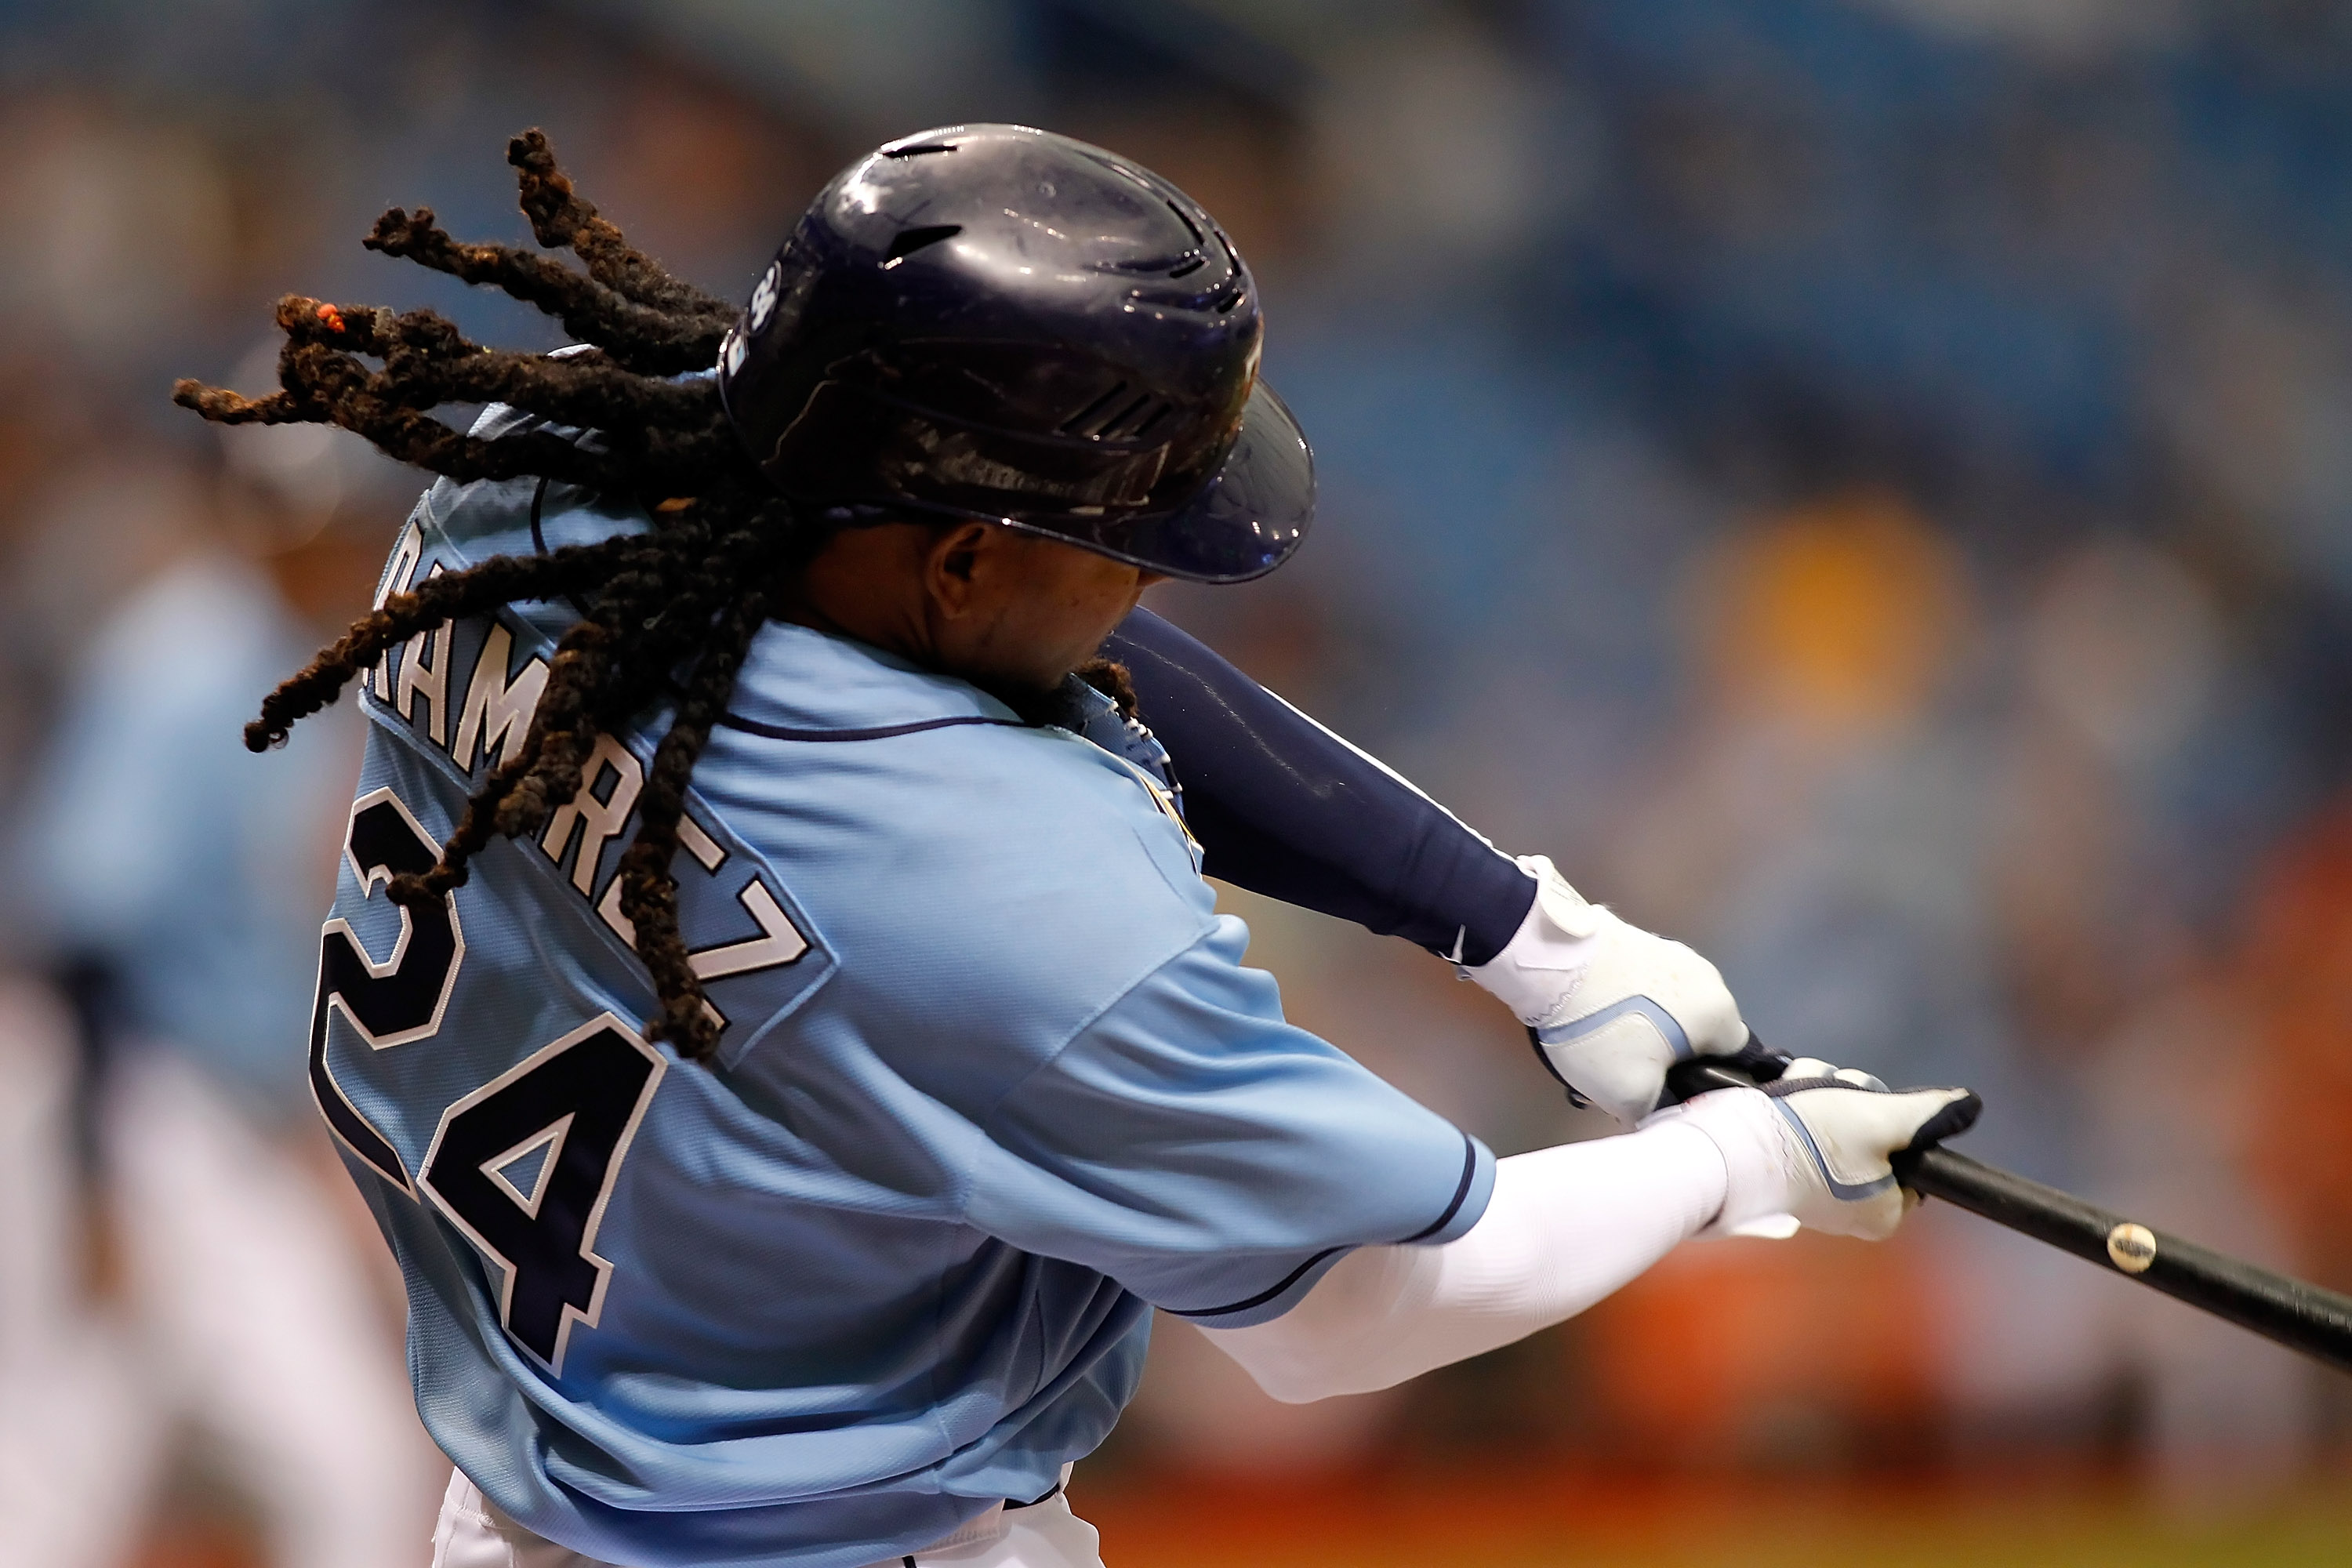 ST. PETERSBURG, FL - APRIL 03:  Designated hitter Manny Ramirez #24 of the Tampa Bay Rays bats against the Baltimore Orioles during the game at Tropicana Field on April 3, 2011 in St. Petersburg, Florida.  (Photo by J. Meric/Getty Images)